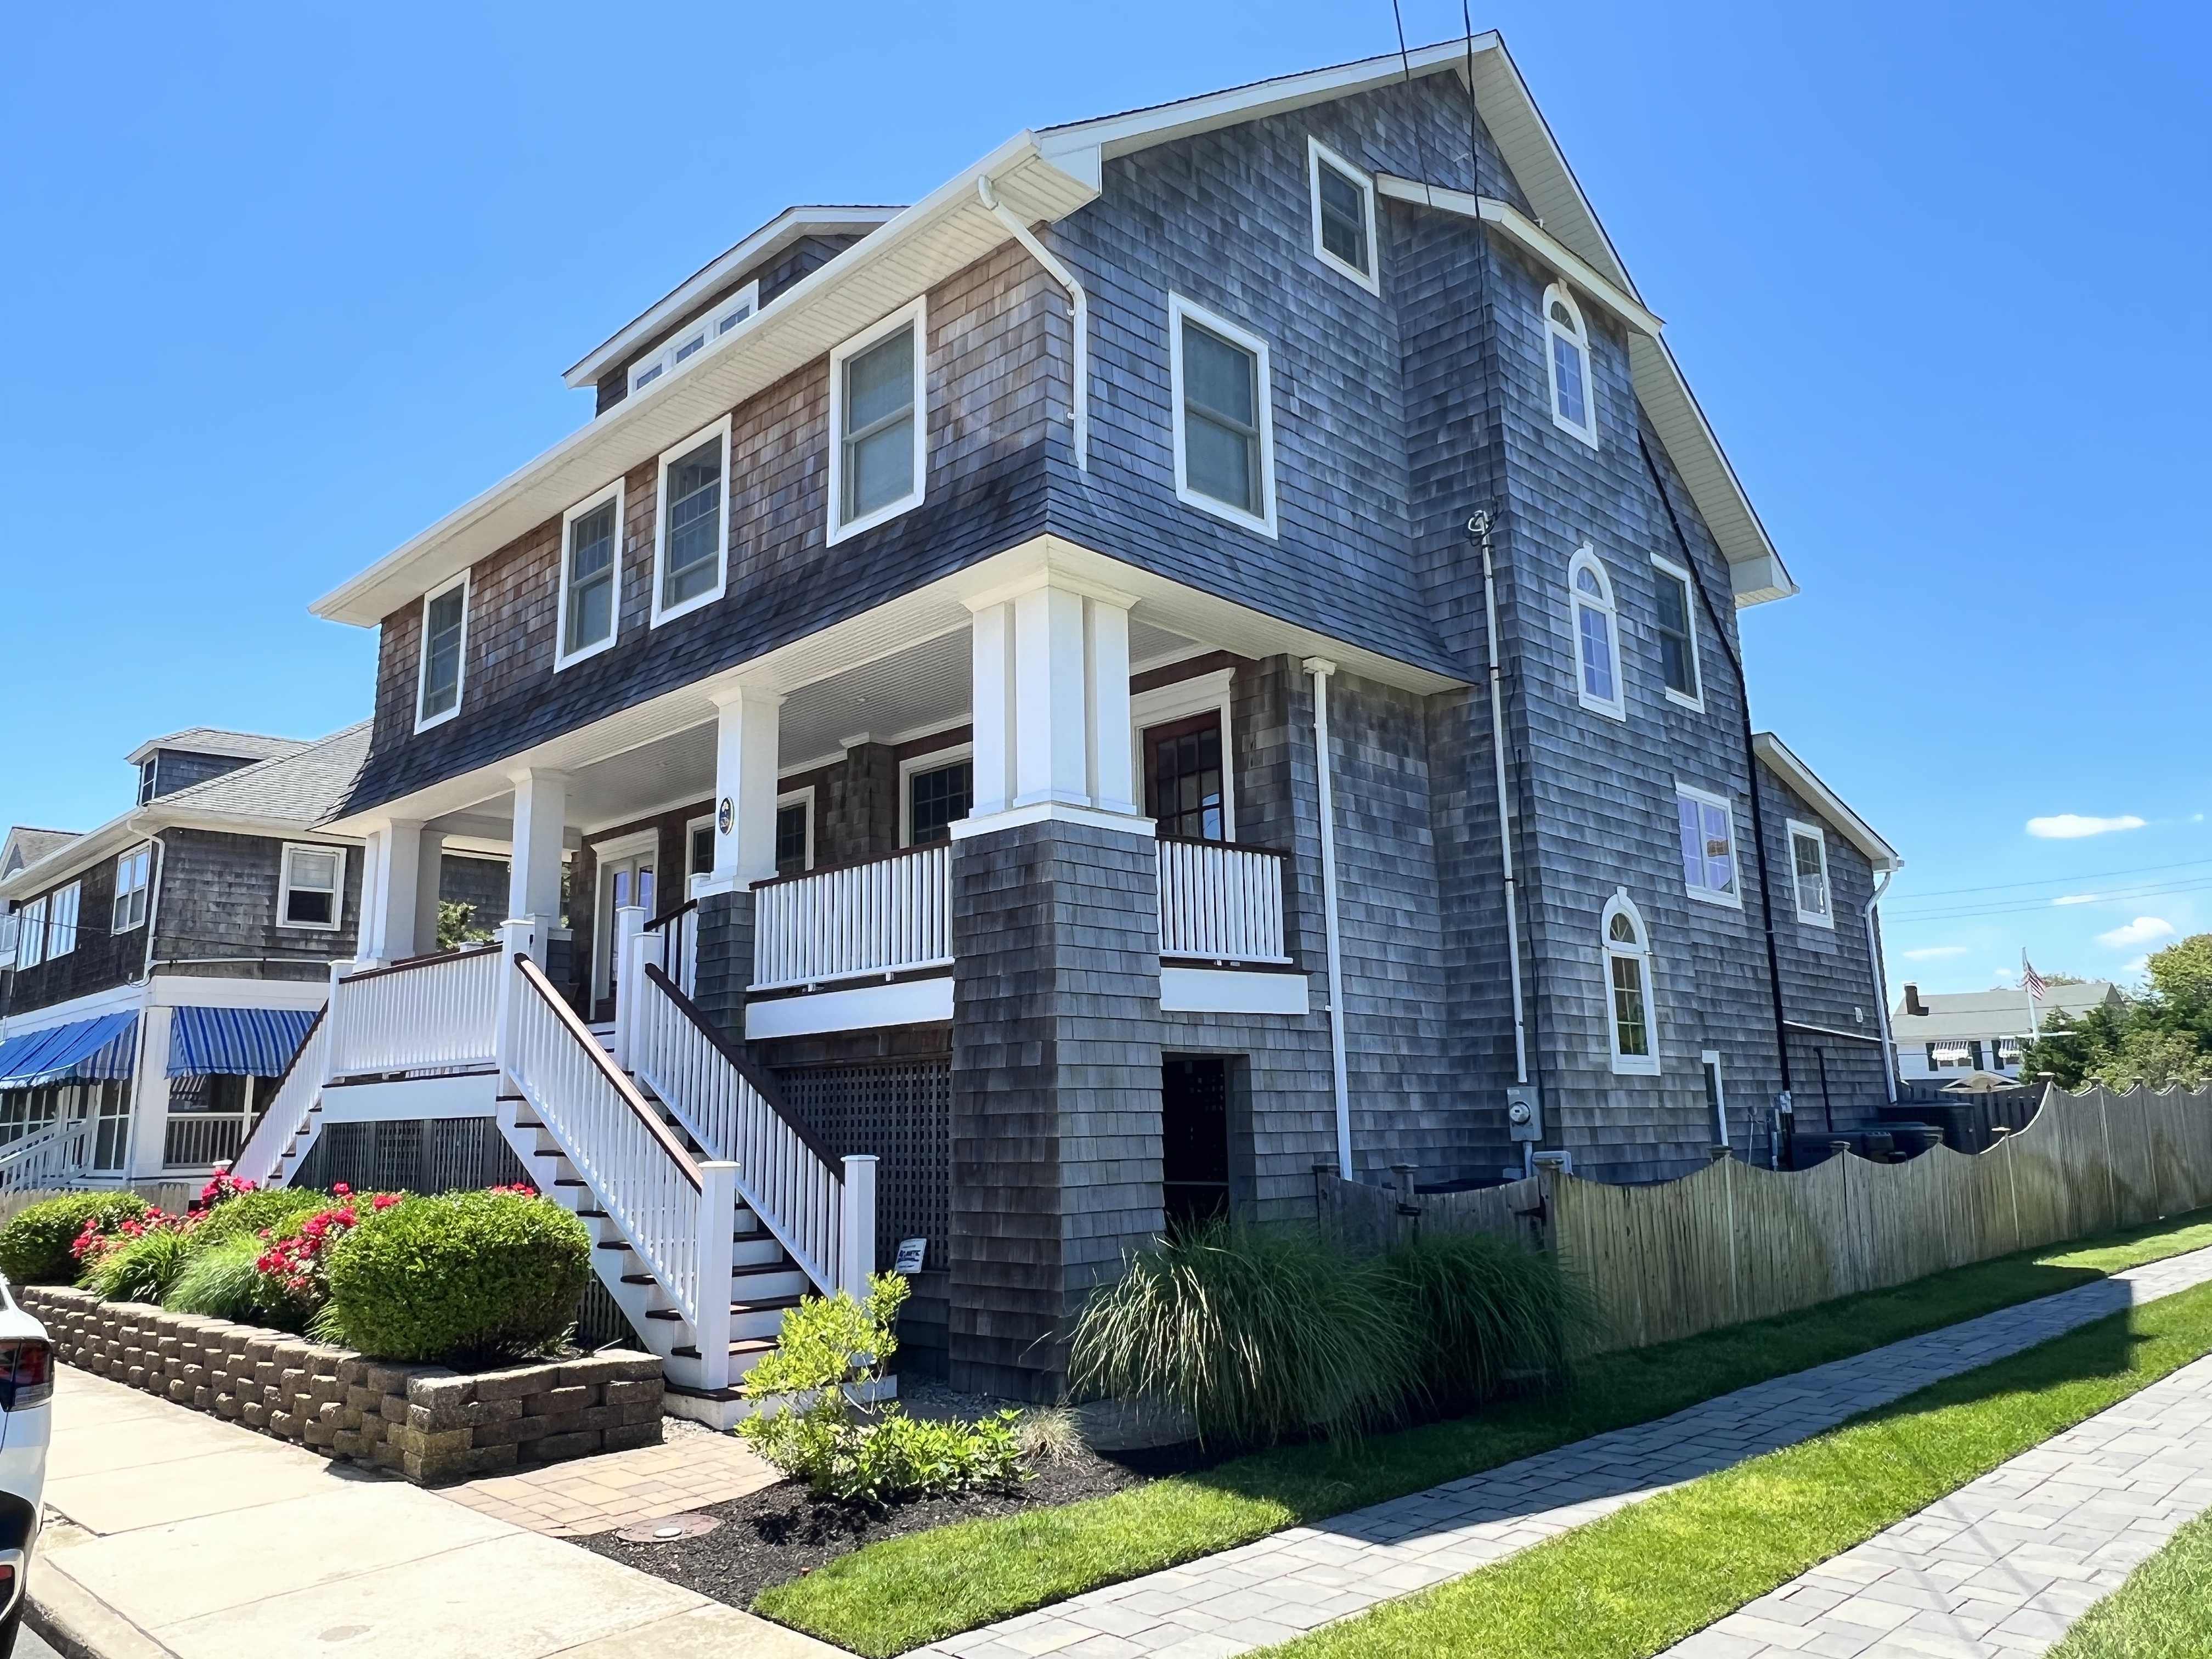 626 East Ave, Bay Head, NJ 08742 – Across from the beach, with a pool